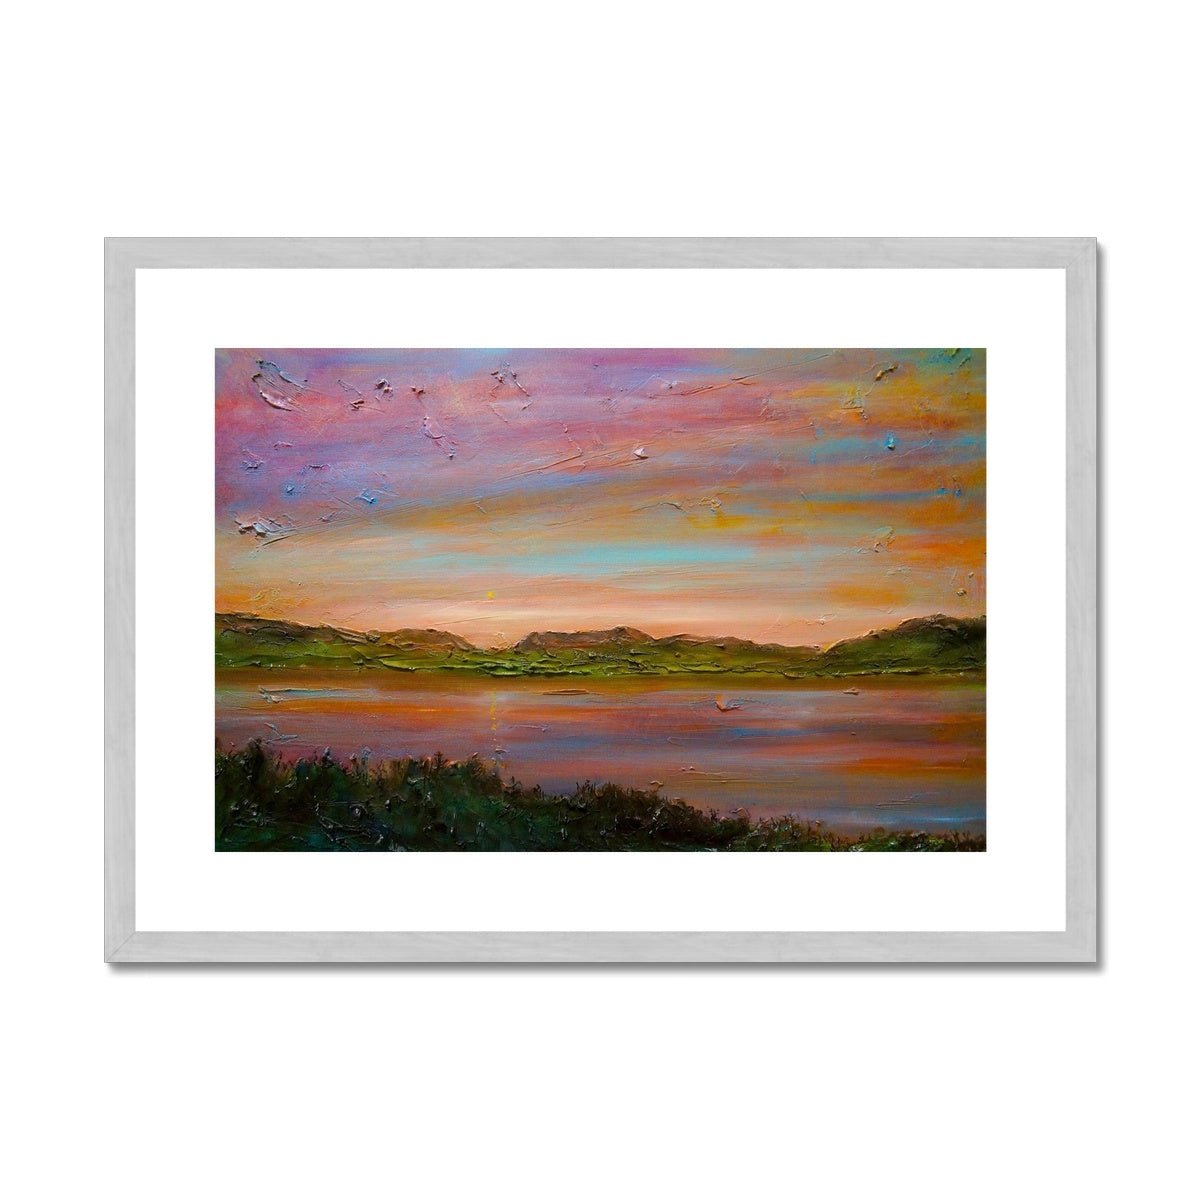 Gourock Golf Club Sunset Painting | Antique Framed & Mounted Prints From Scotland-Antique Framed & Mounted Prints-River Clyde Art Gallery-A2 Landscape-Silver Frame-Paintings, Prints, Homeware, Art Gifts From Scotland By Scottish Artist Kevin Hunter